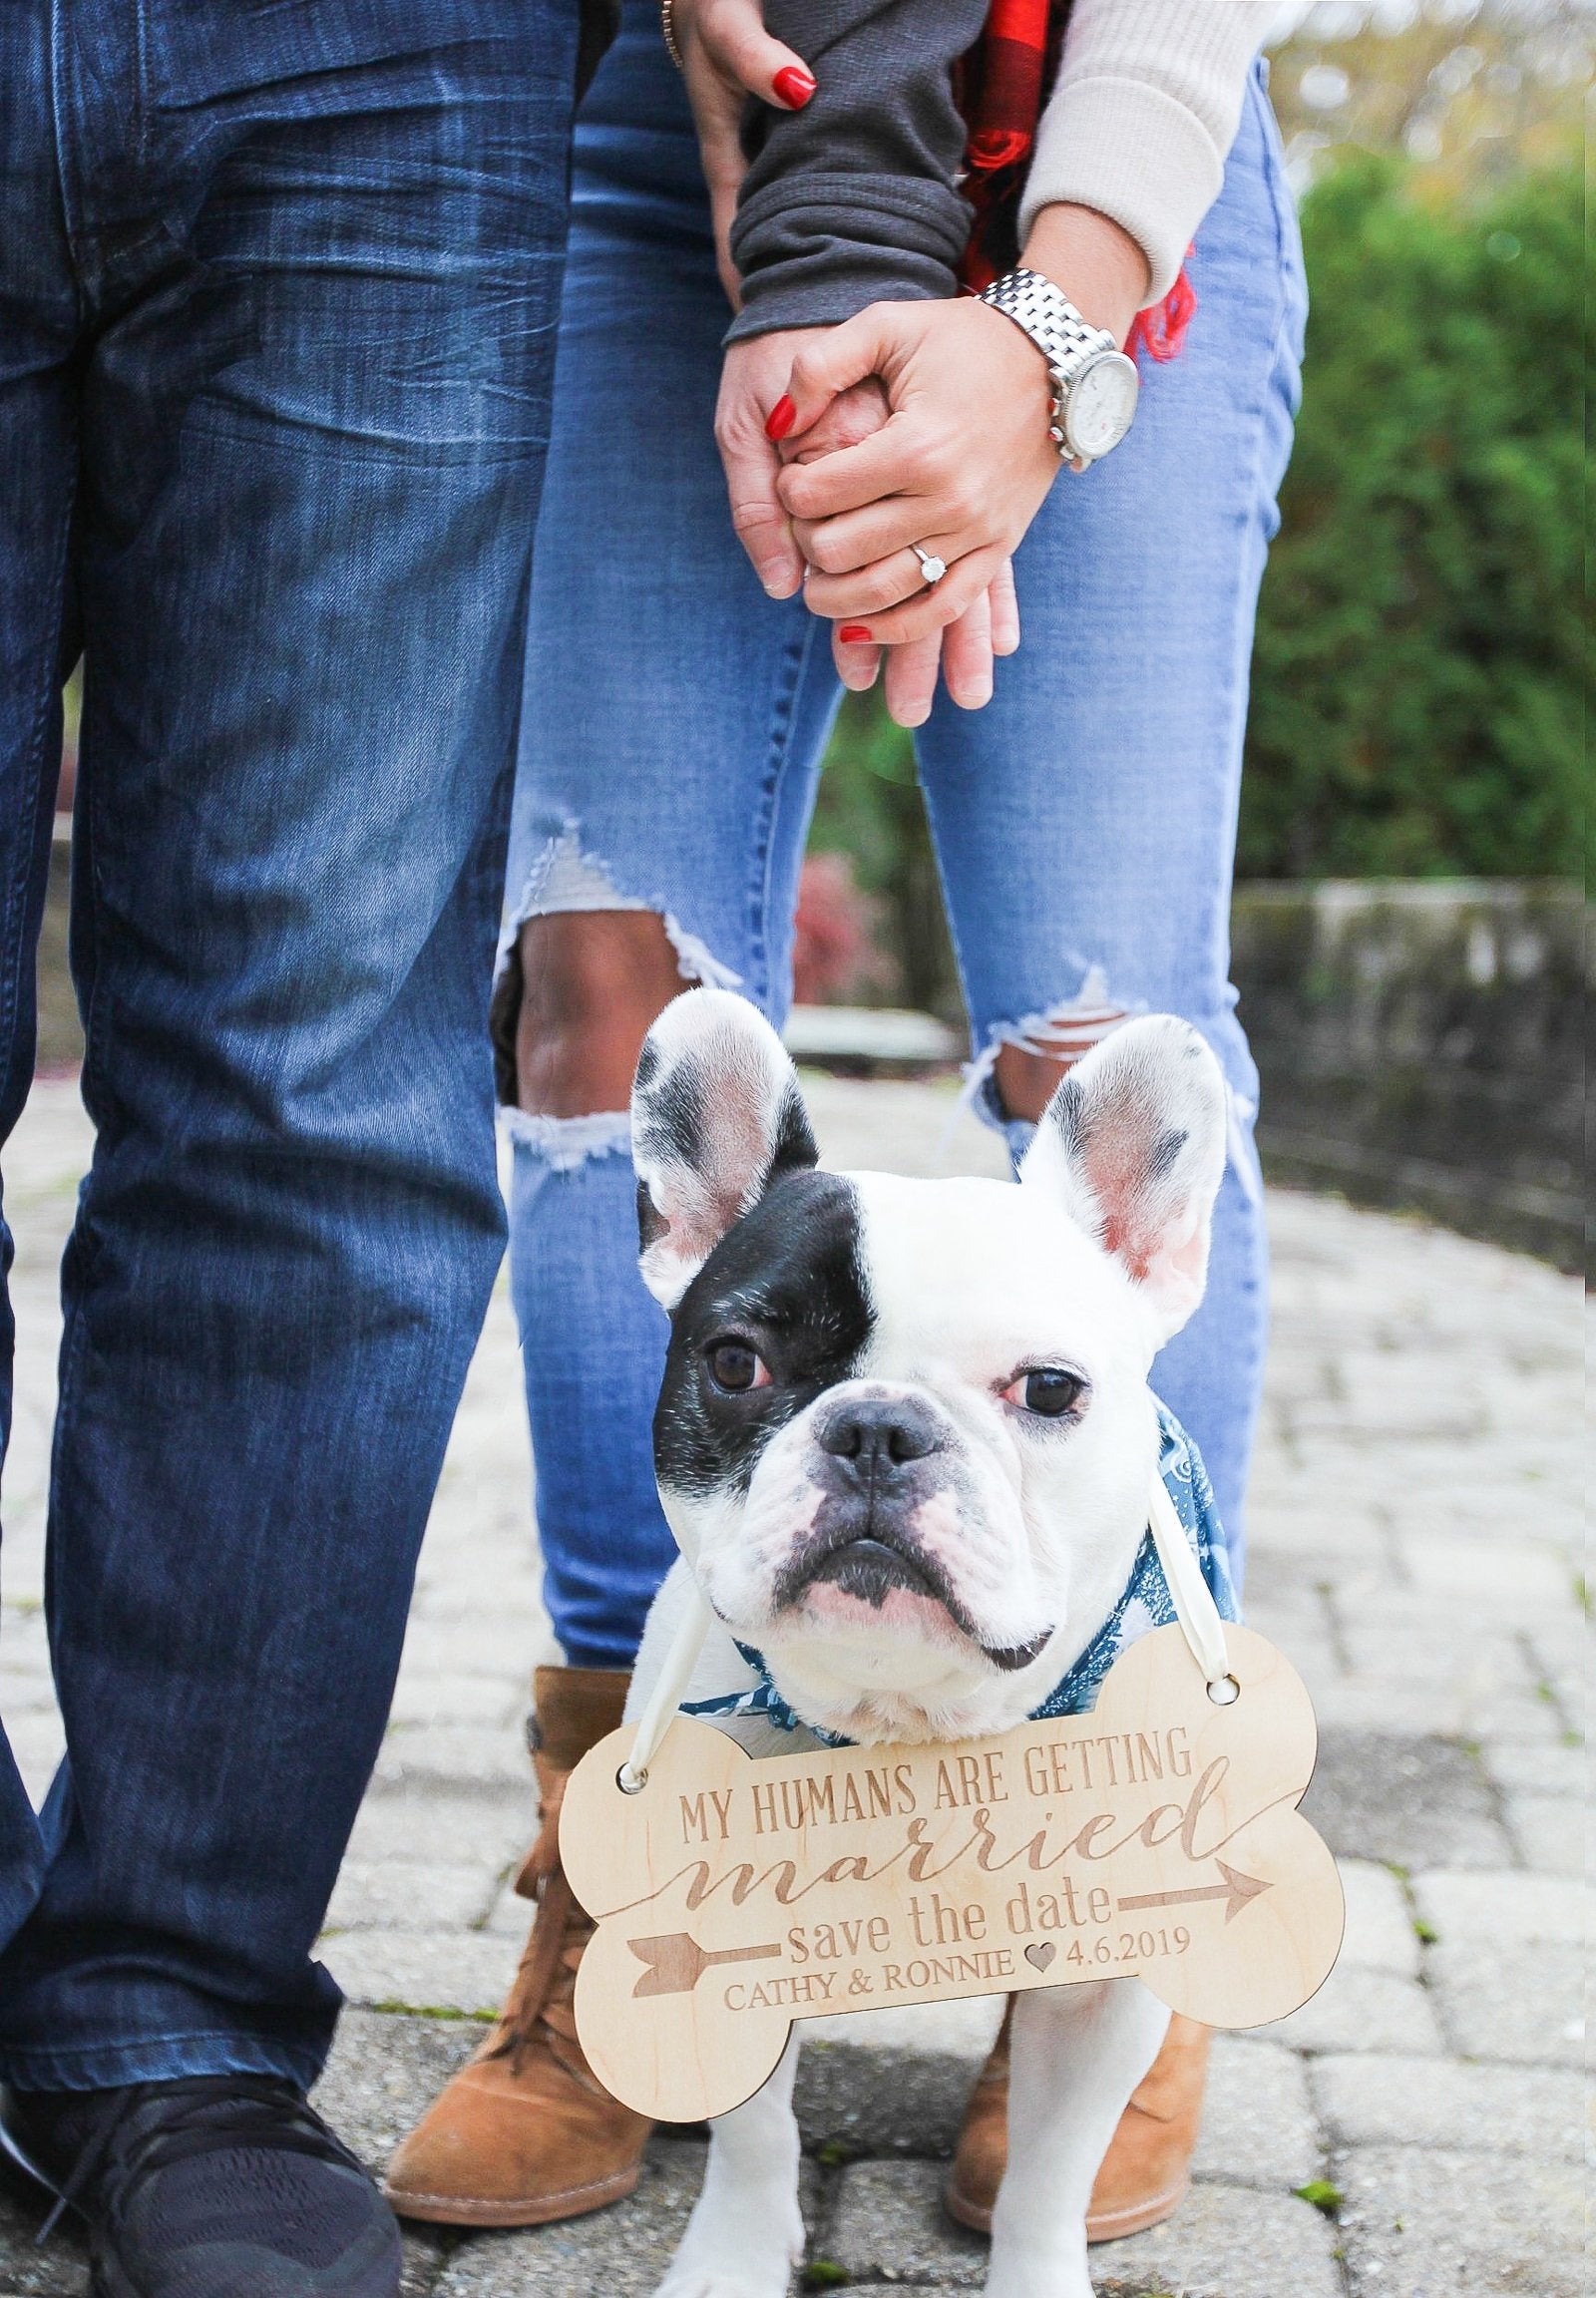 Custom Pet Sign - SAVE THE DATE!